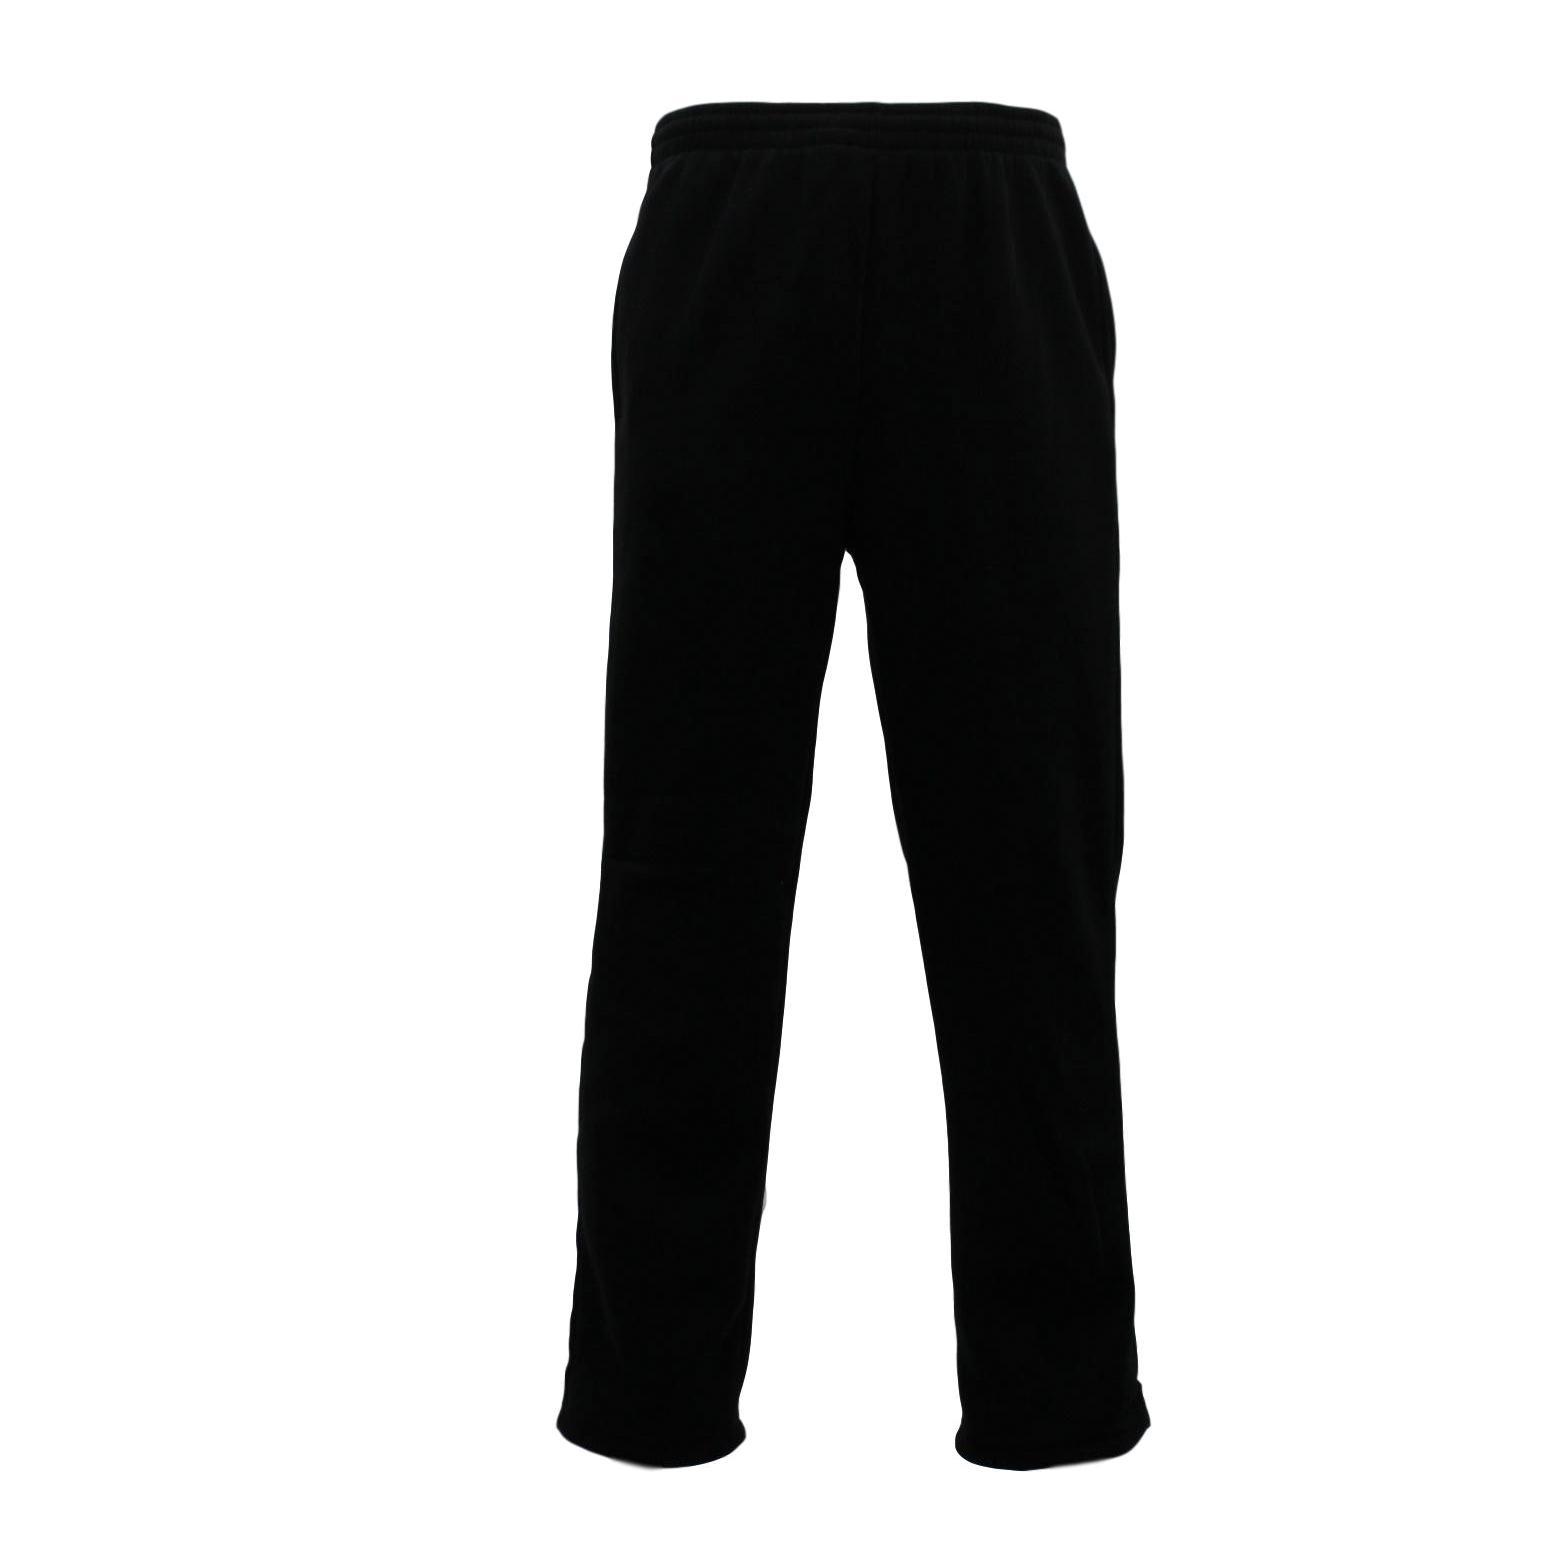 Buy Aeropostale Fleece Lined Knitted Track Pants - NNNOW.com